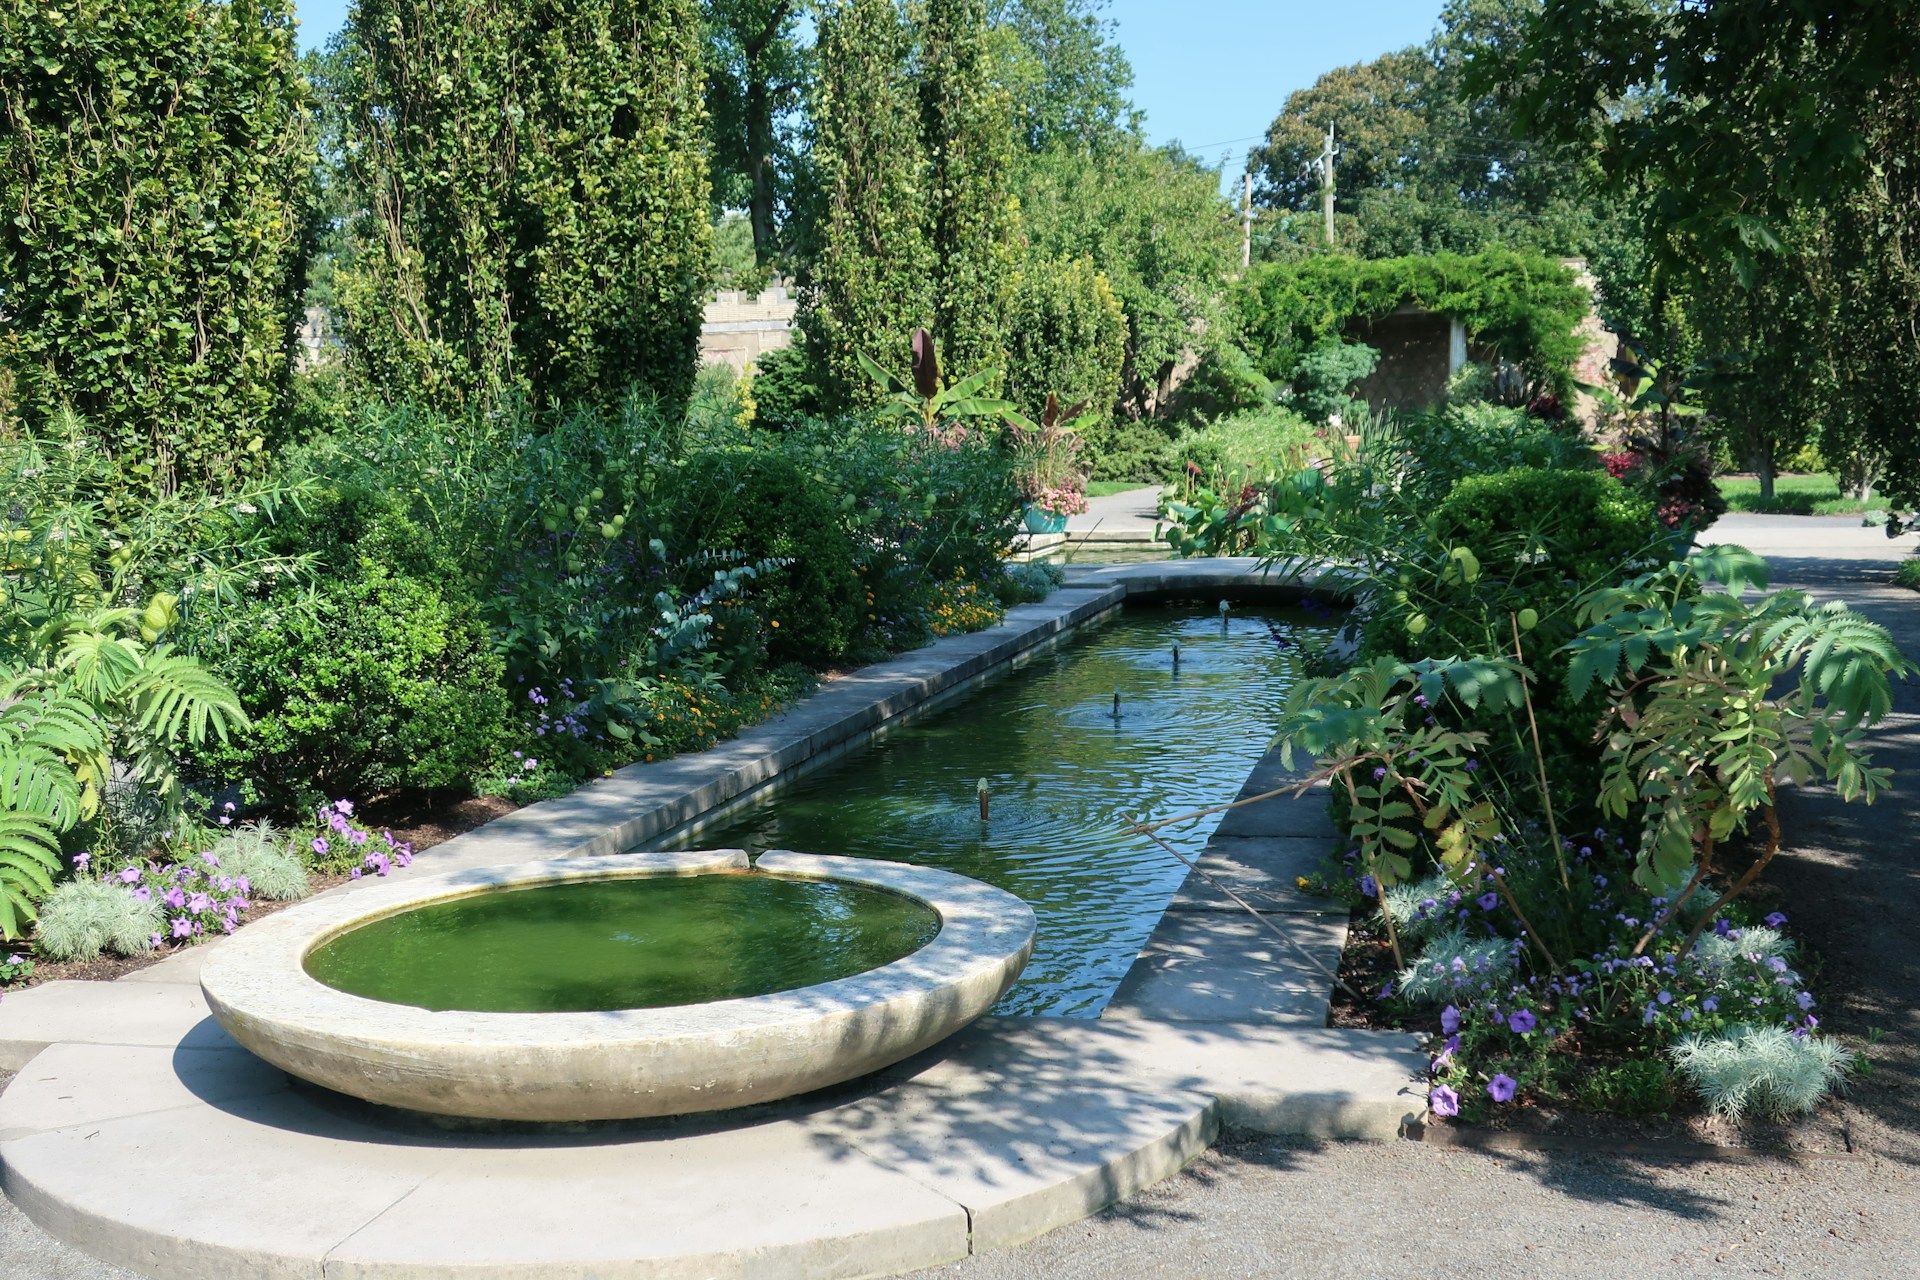 Untermyer Park and Gardens, North Broadway, Yonkers, NY, USA